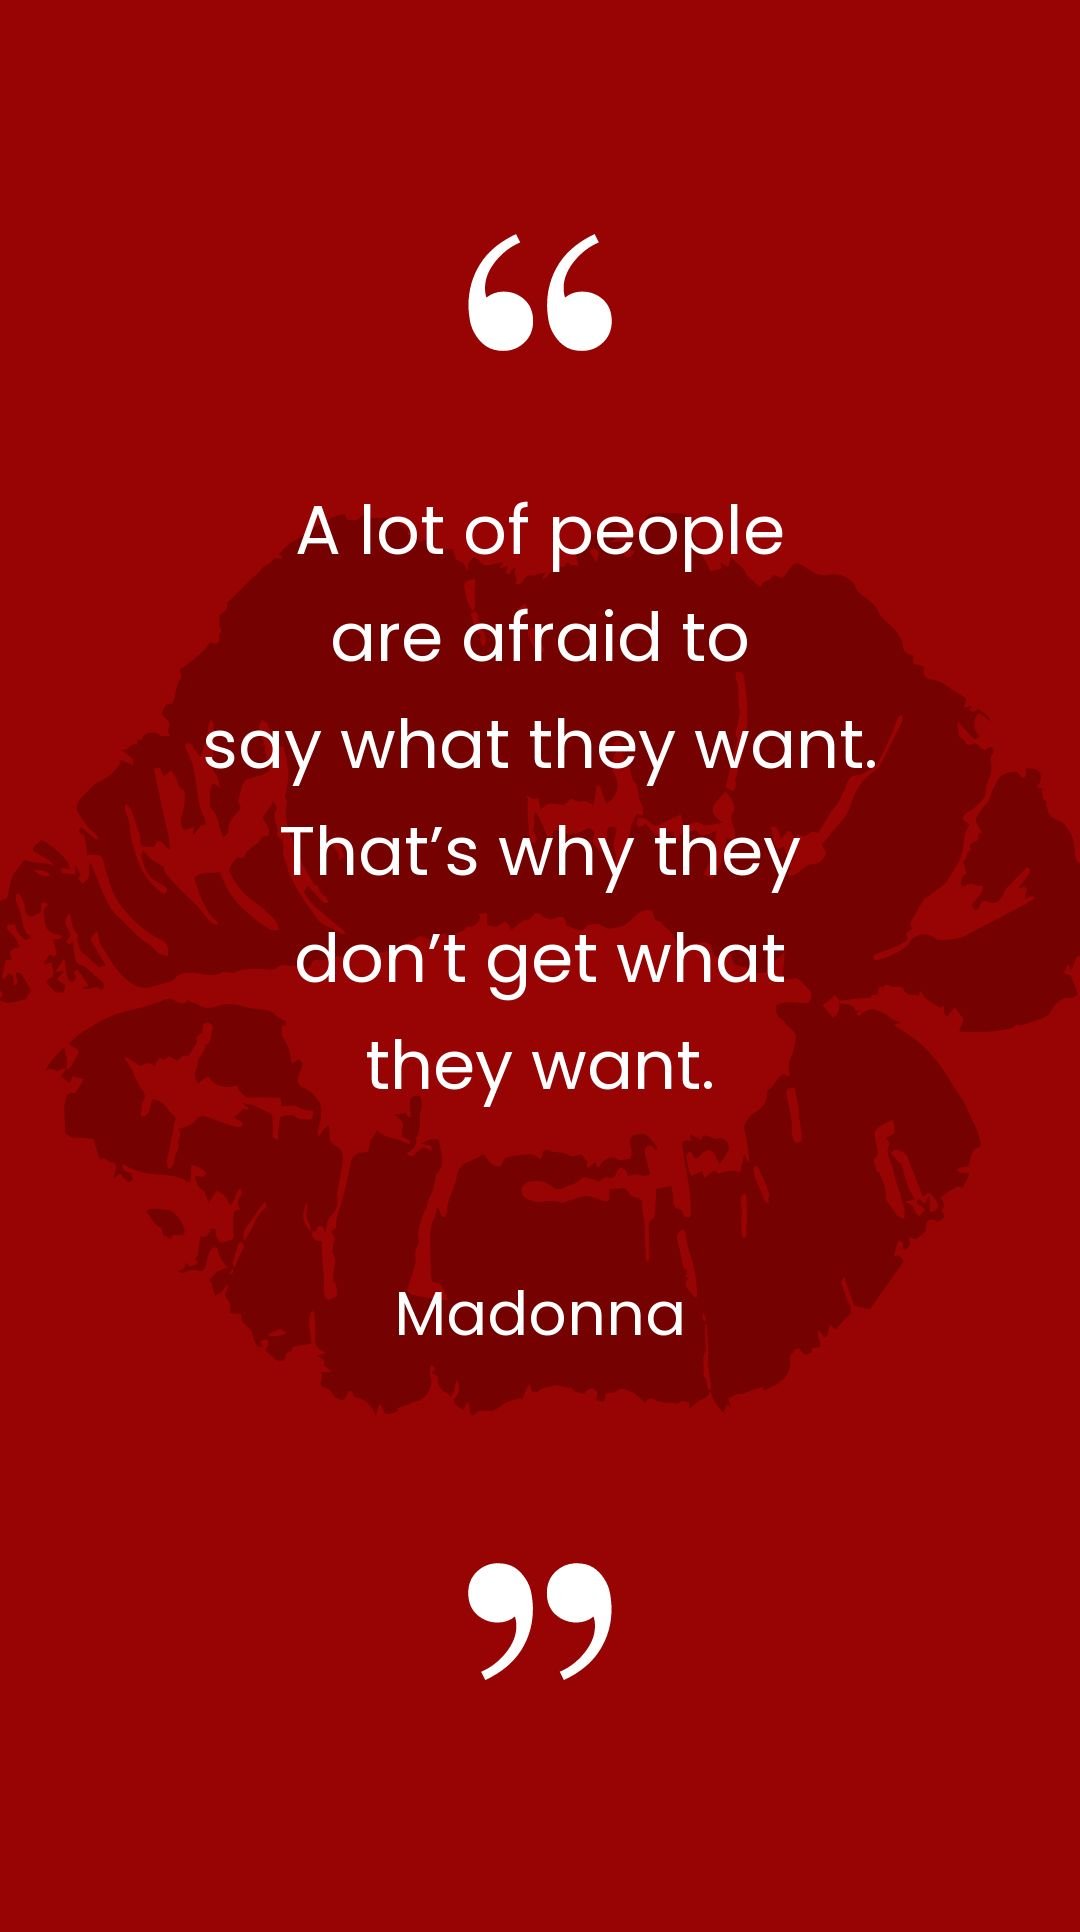 Madonna - A lot of people are afraid to say what they want. That’s why they don’t get what they want.